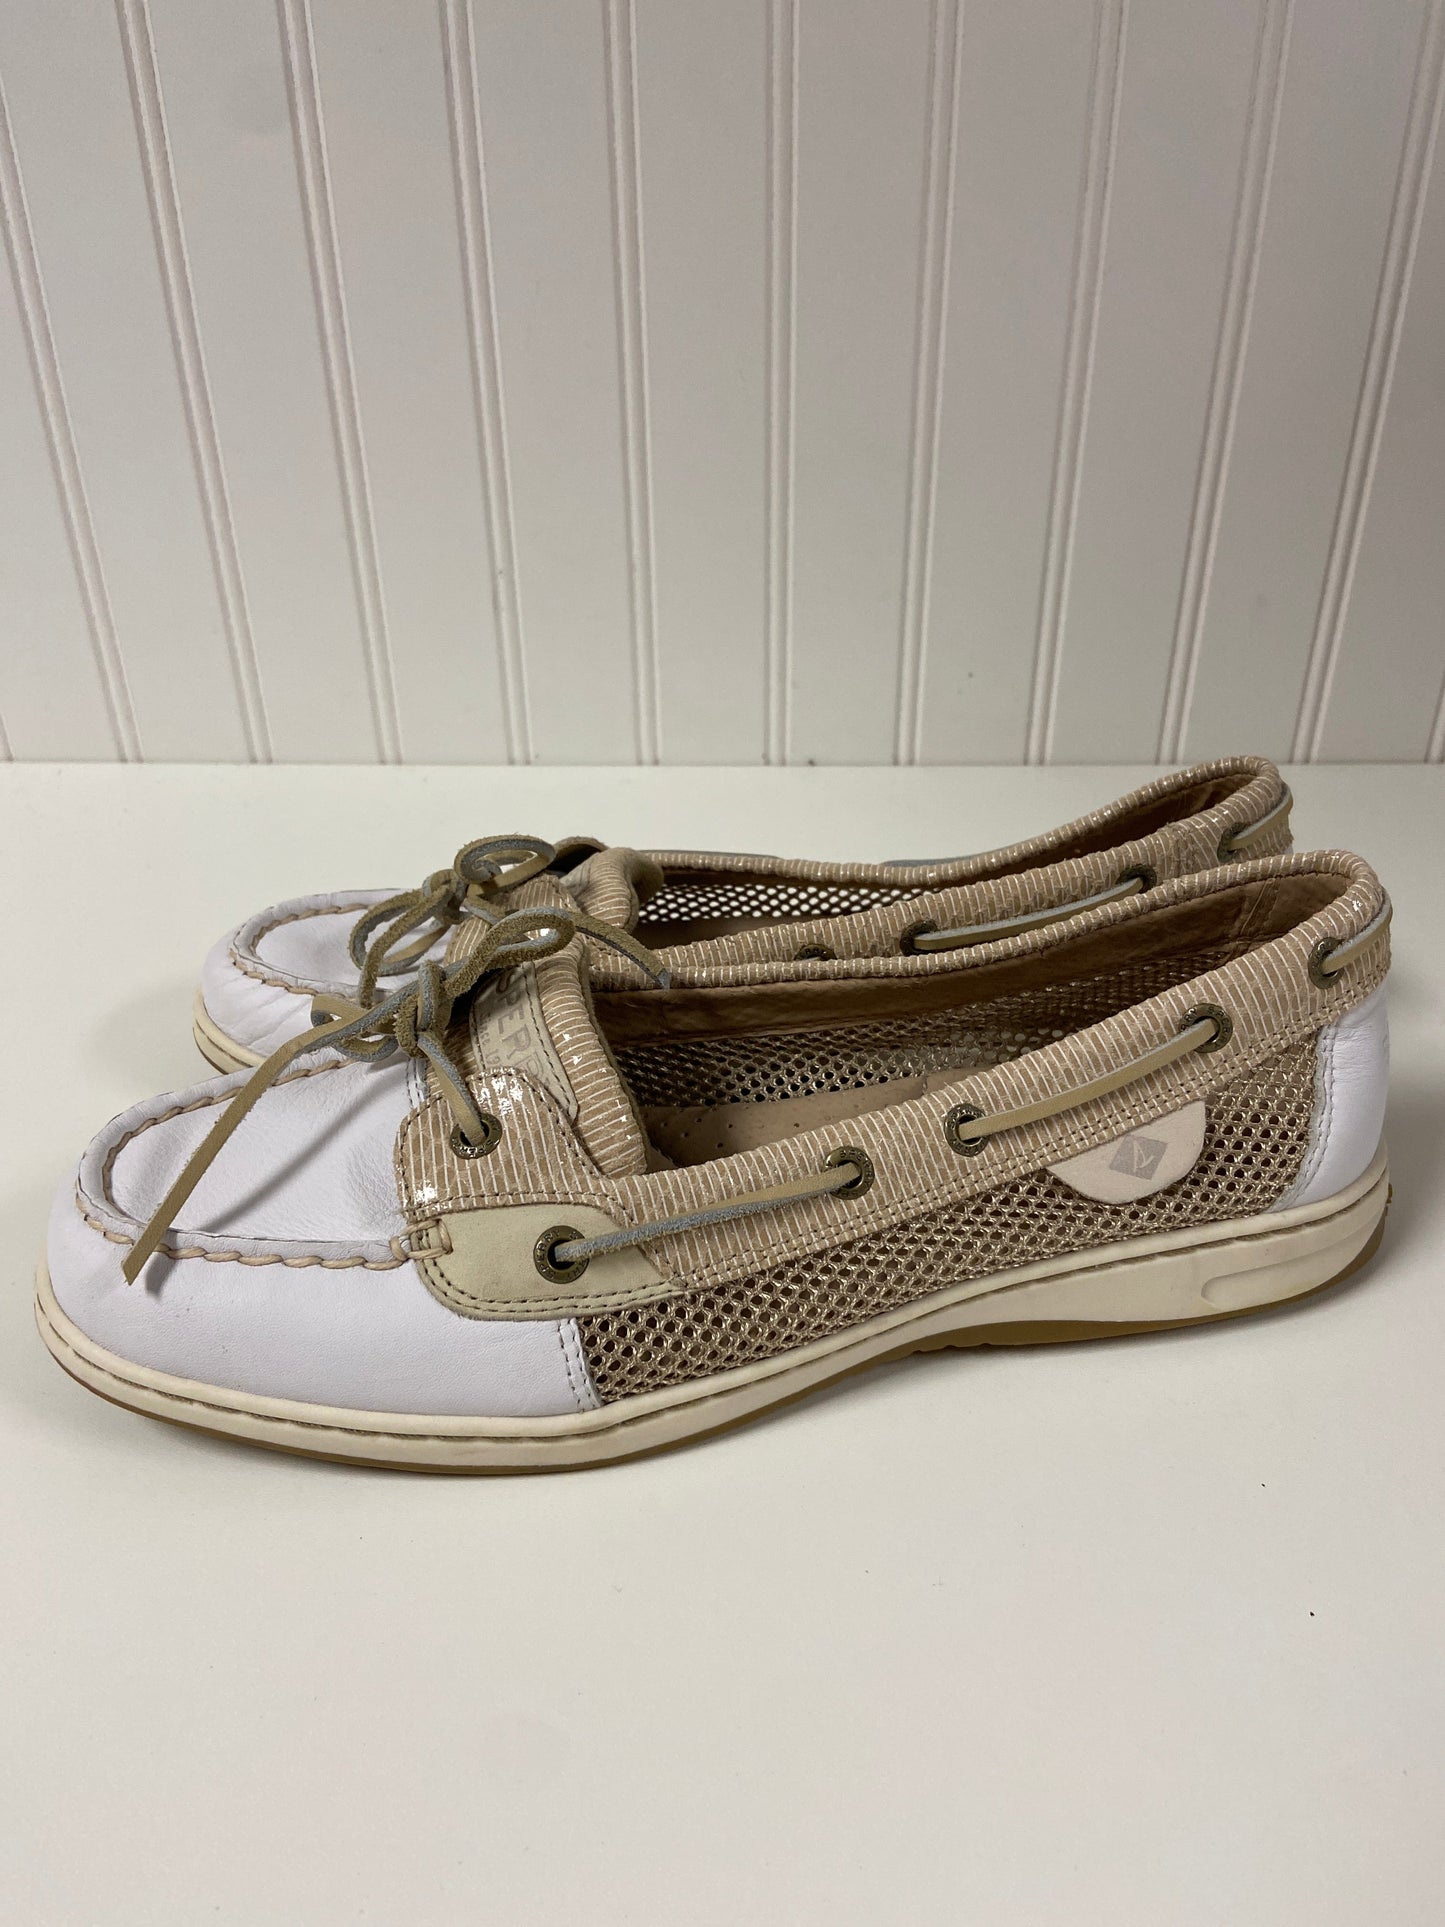 White Shoes Flats Sperry, Size 10